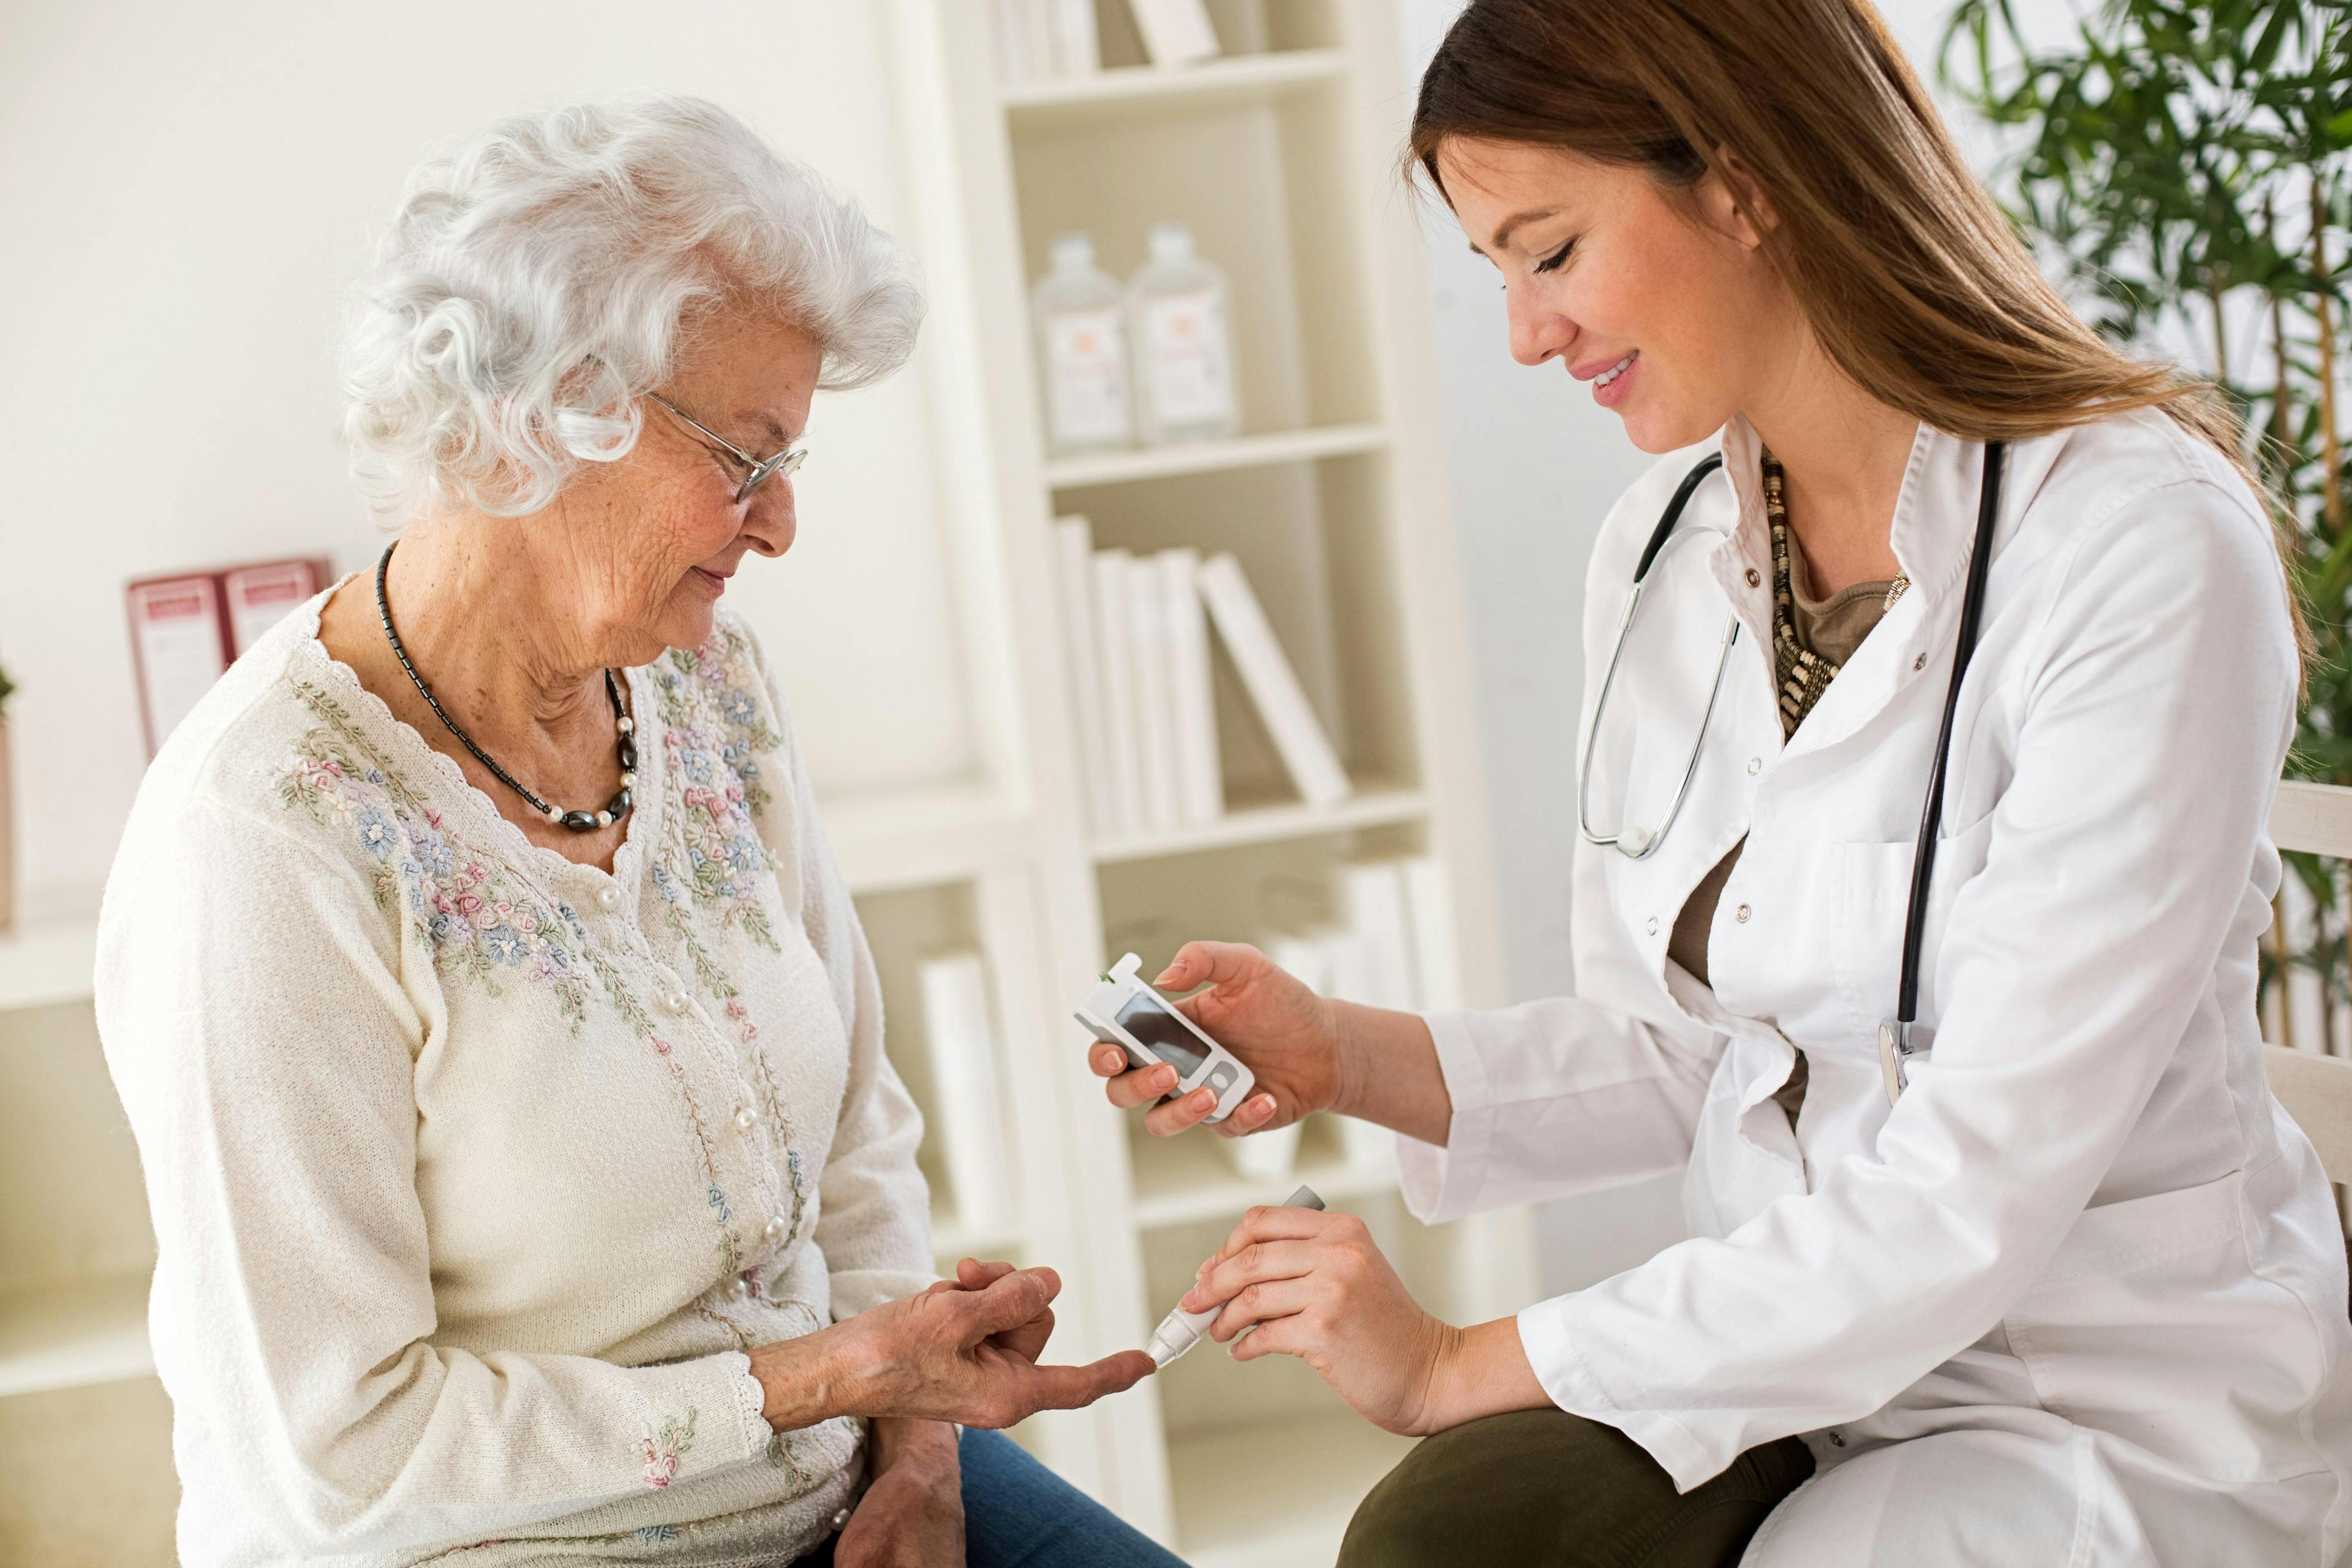 Earlier Age at Diagnosis Increases Risk of Adverse Outcomes in Diabetes